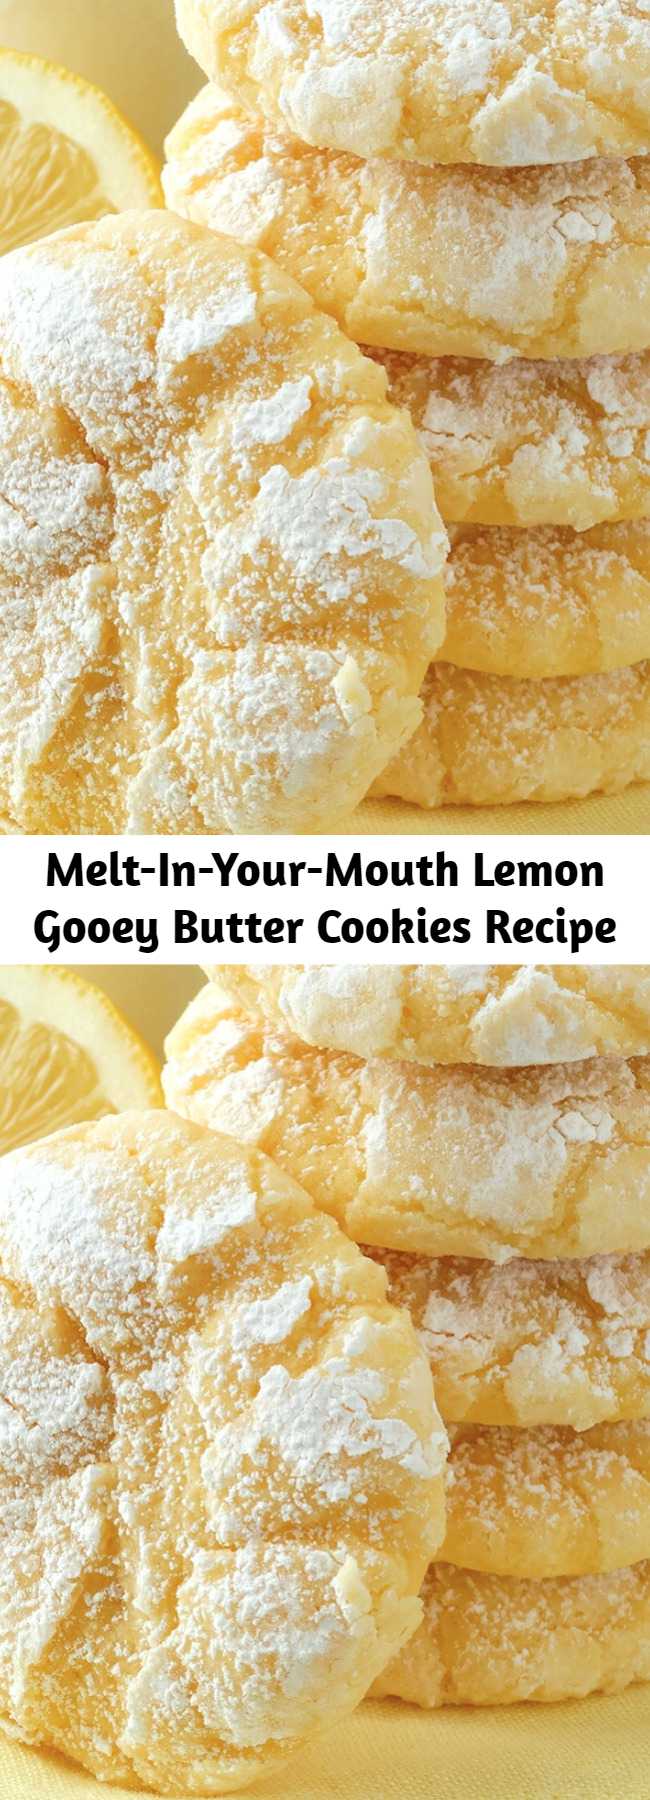 Melt-In-Your-Mouth Lemon Gooey Butter Cookies Recipe - Deliciousness made with all-natural flavoring—triple lemon! Melt-in-your-mouth Lemon Gooey Butter Cookies at their finest and from scratch. What could be better? Our recipe was reverse engineered from standard recipes for Gooey Butter Cookies calling for boxed yellow cake mix. The result is simply a sublime buttery, light and tender-crumbed cookie sweetened just right and full of lemon flavor. You just can’t have one!